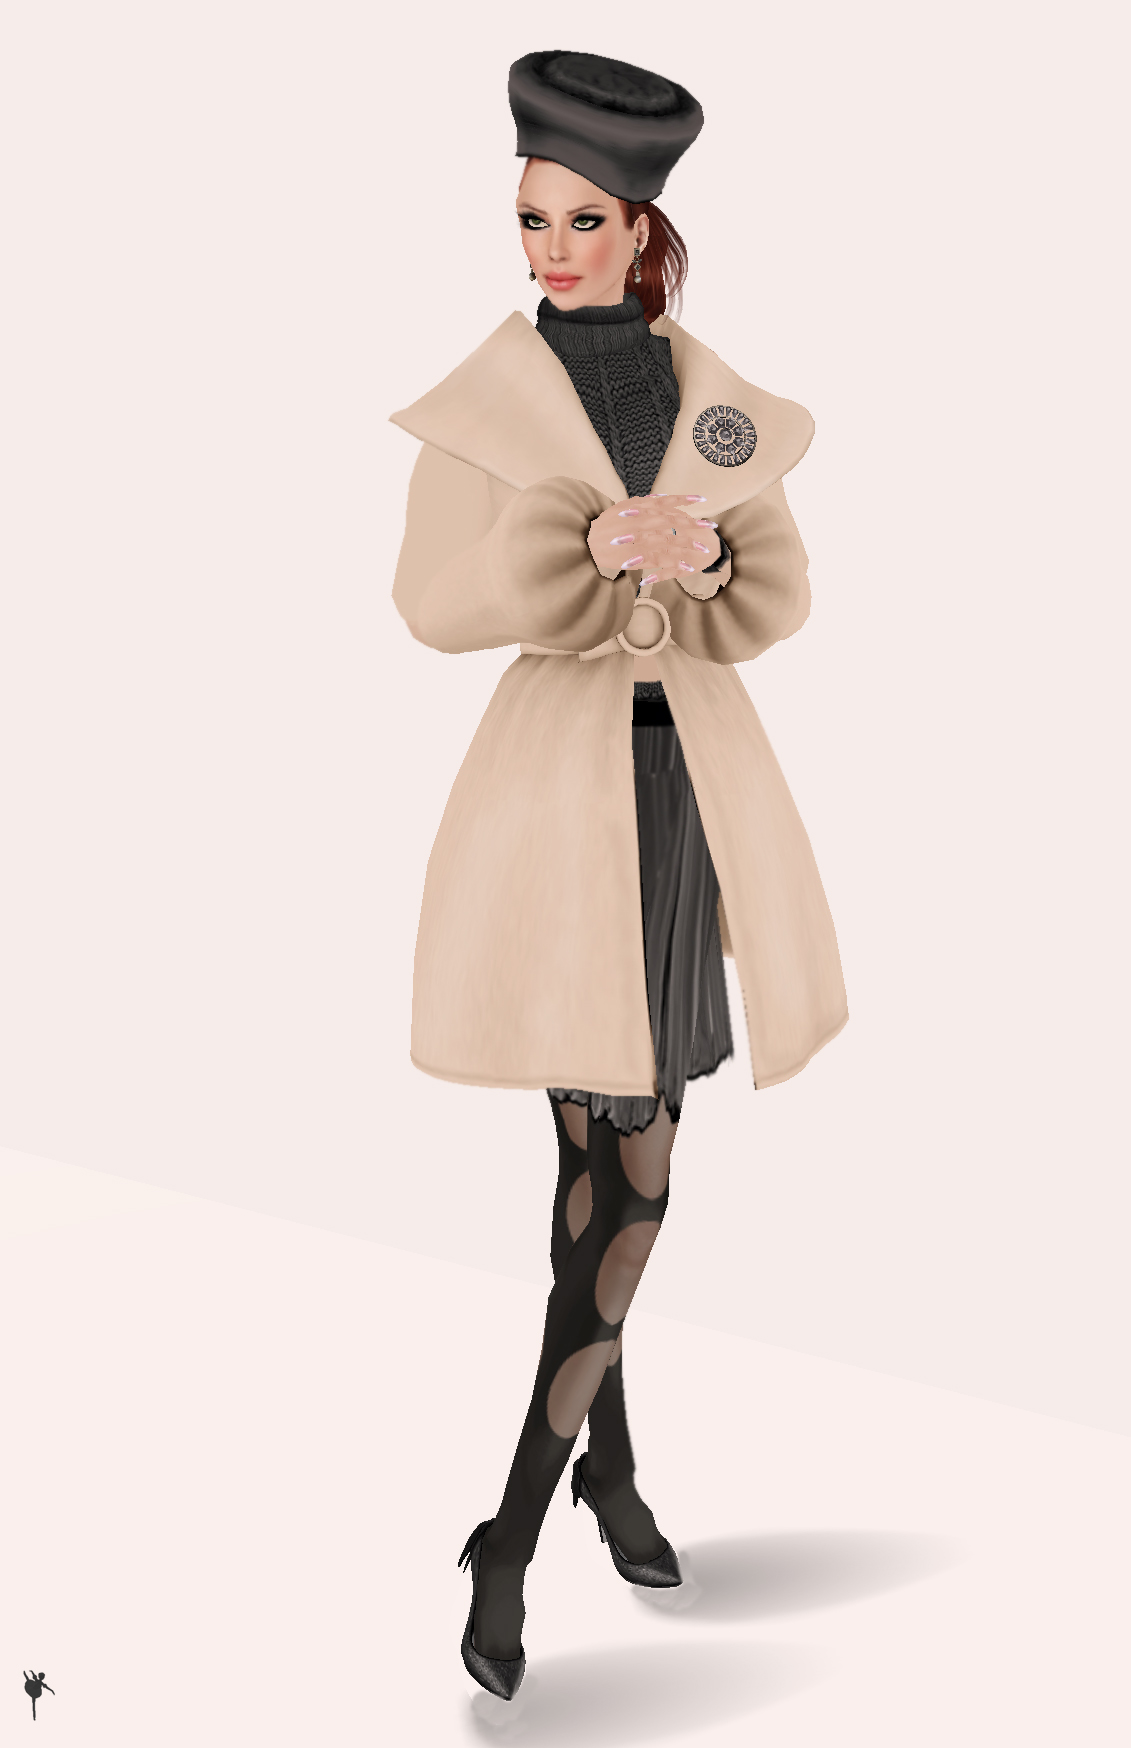 The coat dress is a timeless